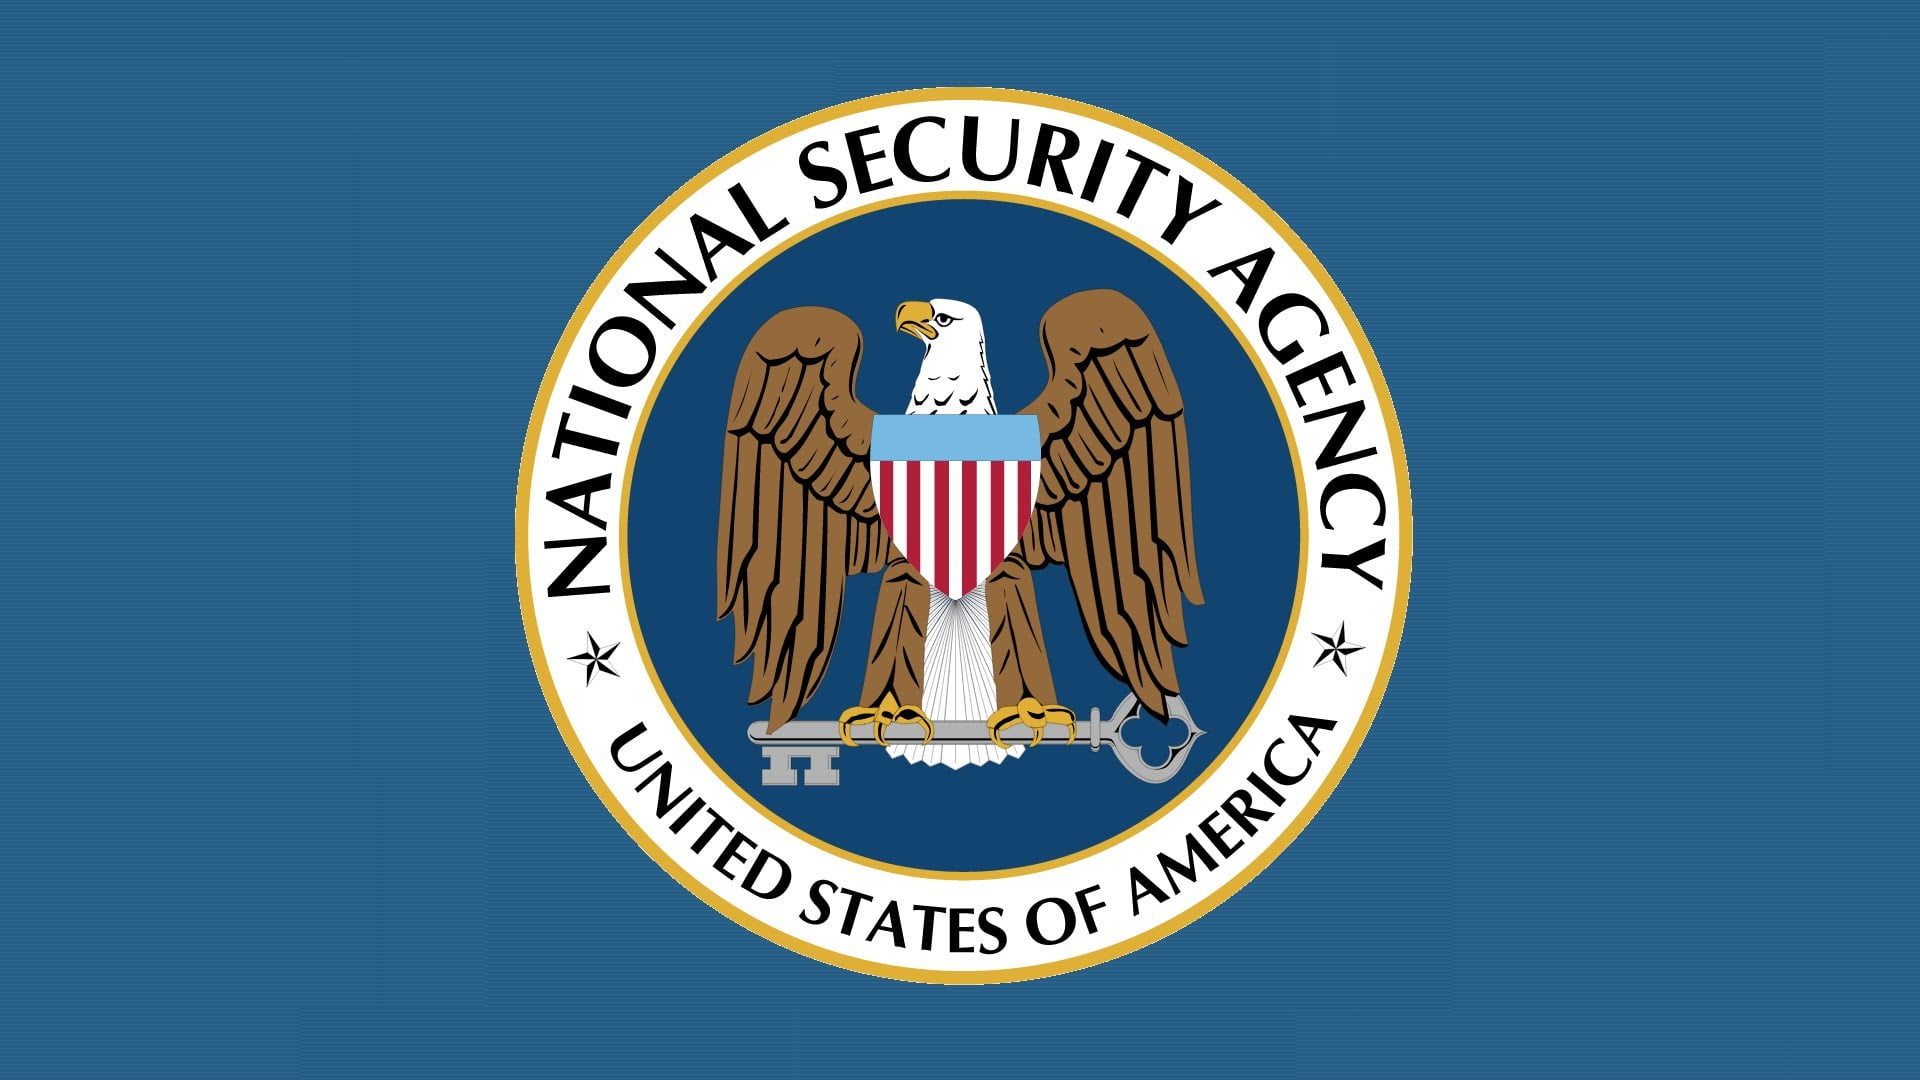 NSA, simple background